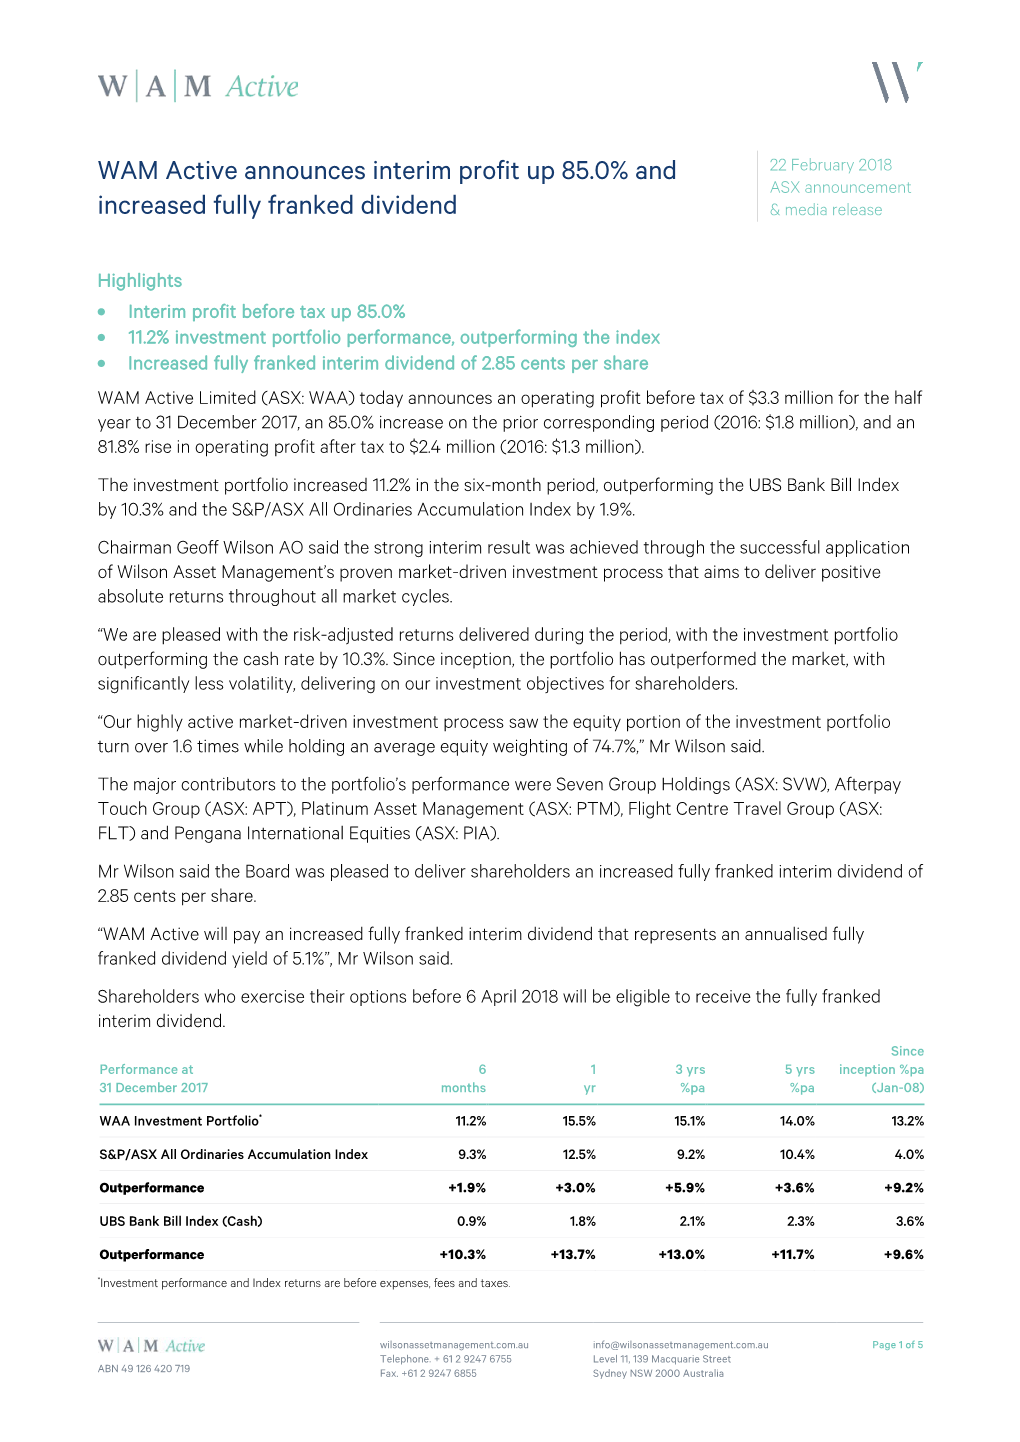 WAM Active Announces Interim Profit up 85.0% and ASX Announcement Increased Fully Franked Dividend & Media Release